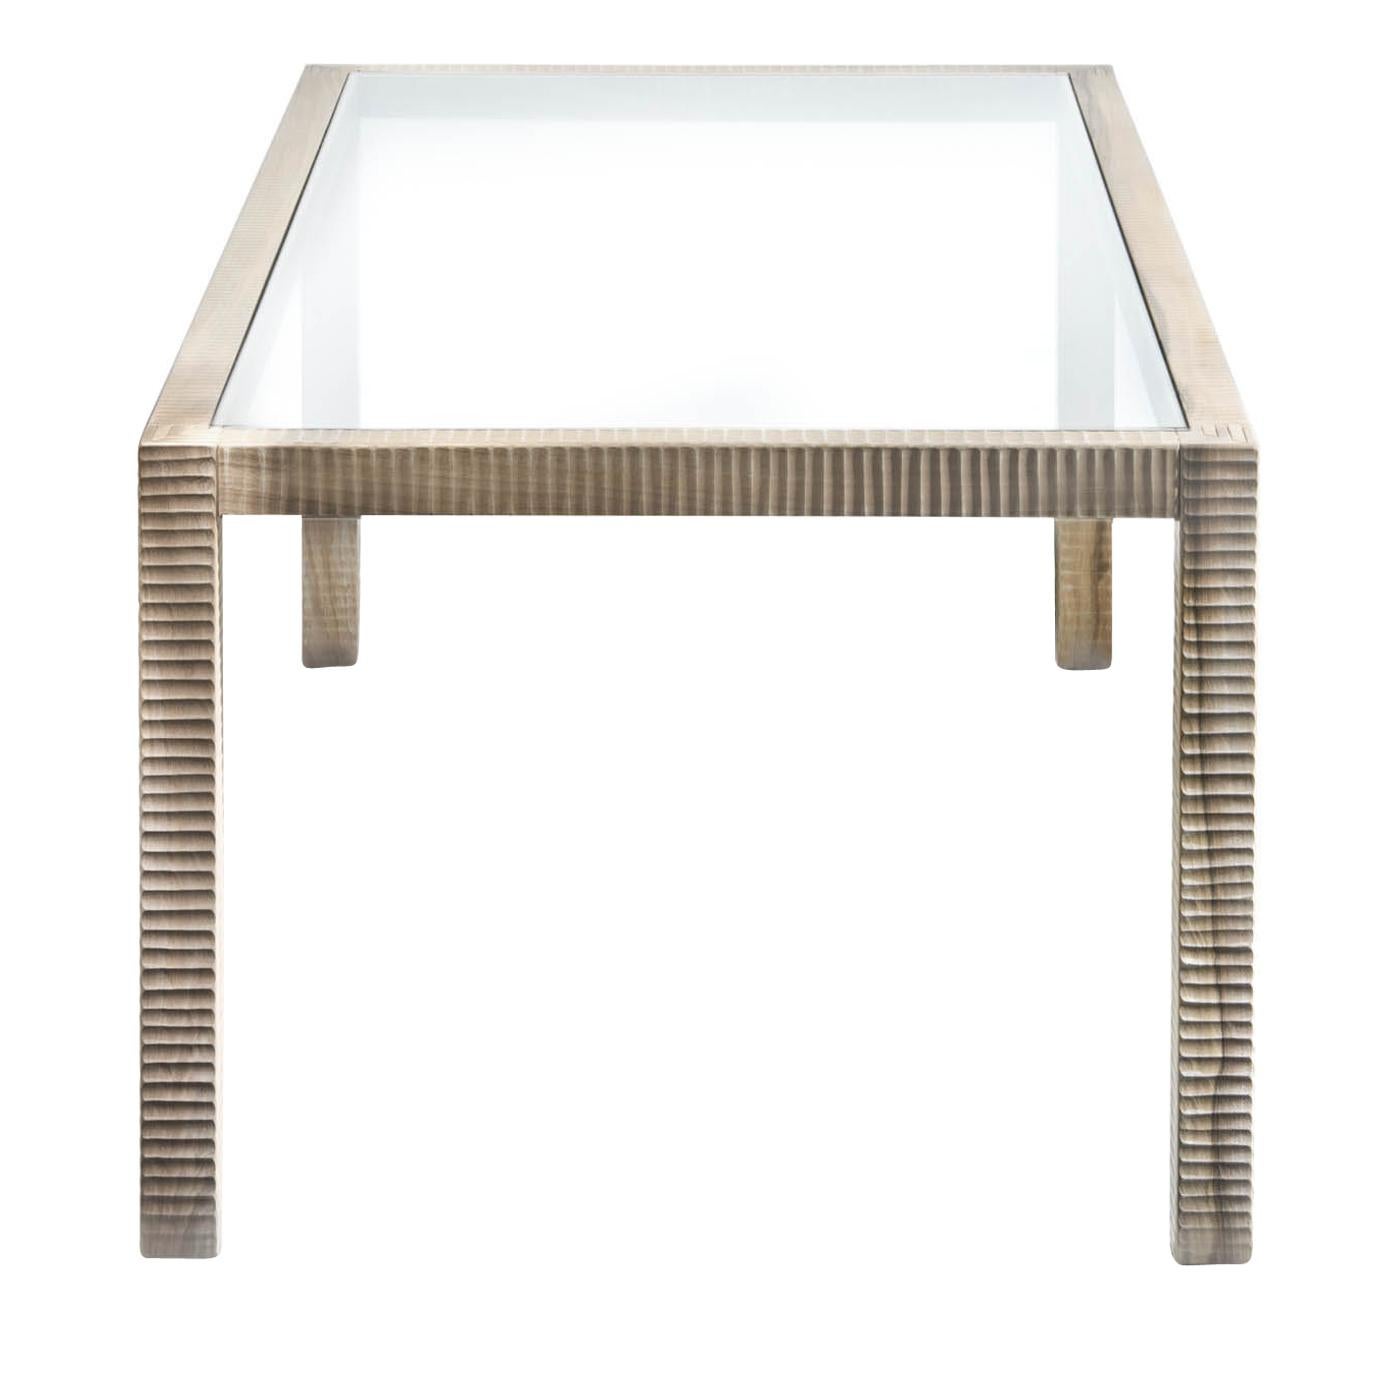 This elegant table is entirely made in Italian walnut wood. The structure features interlocking pieces of wood with visible points and pins and the geometric pattern of the surfaces is hand-carved with a plane. The top glass is nestled in the